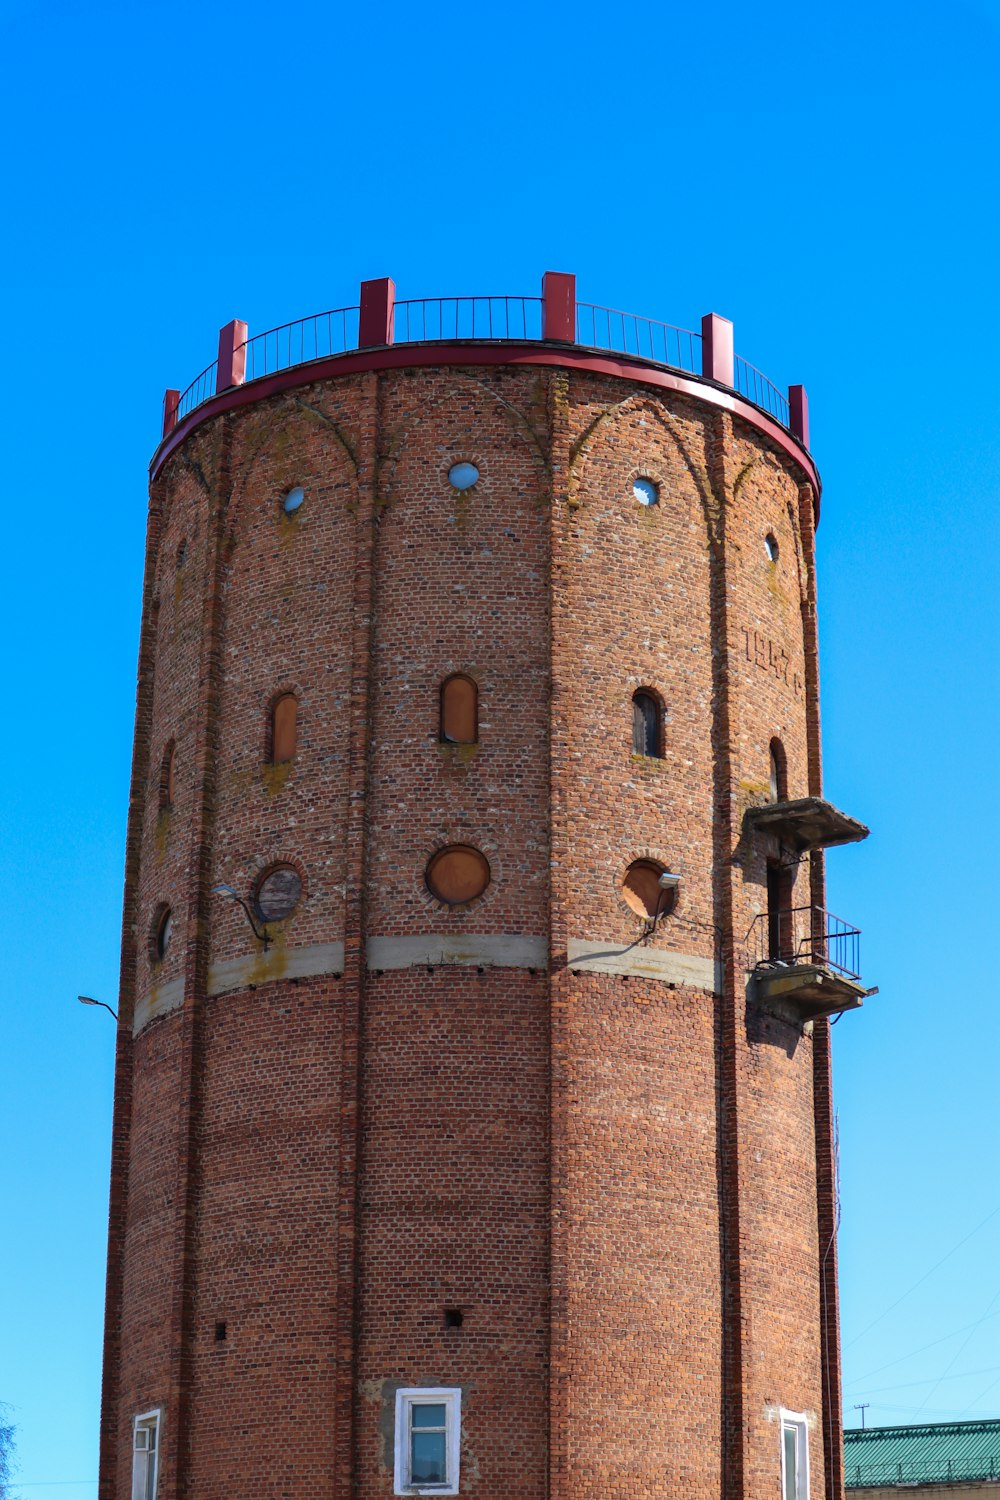 a tall brick tower with a clock on the top of it